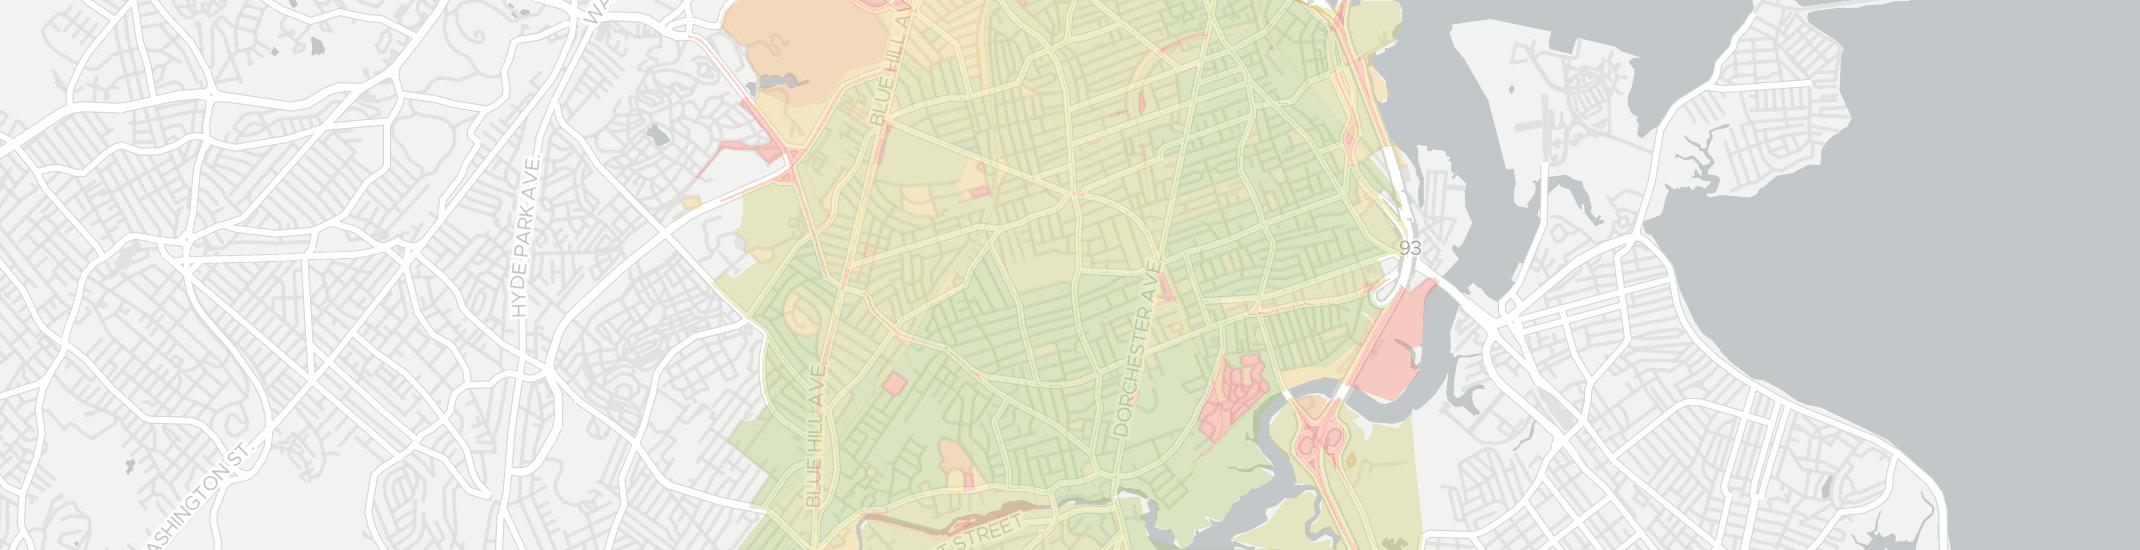 Dorchester Center Internet Competition Map. Click for interactive map.